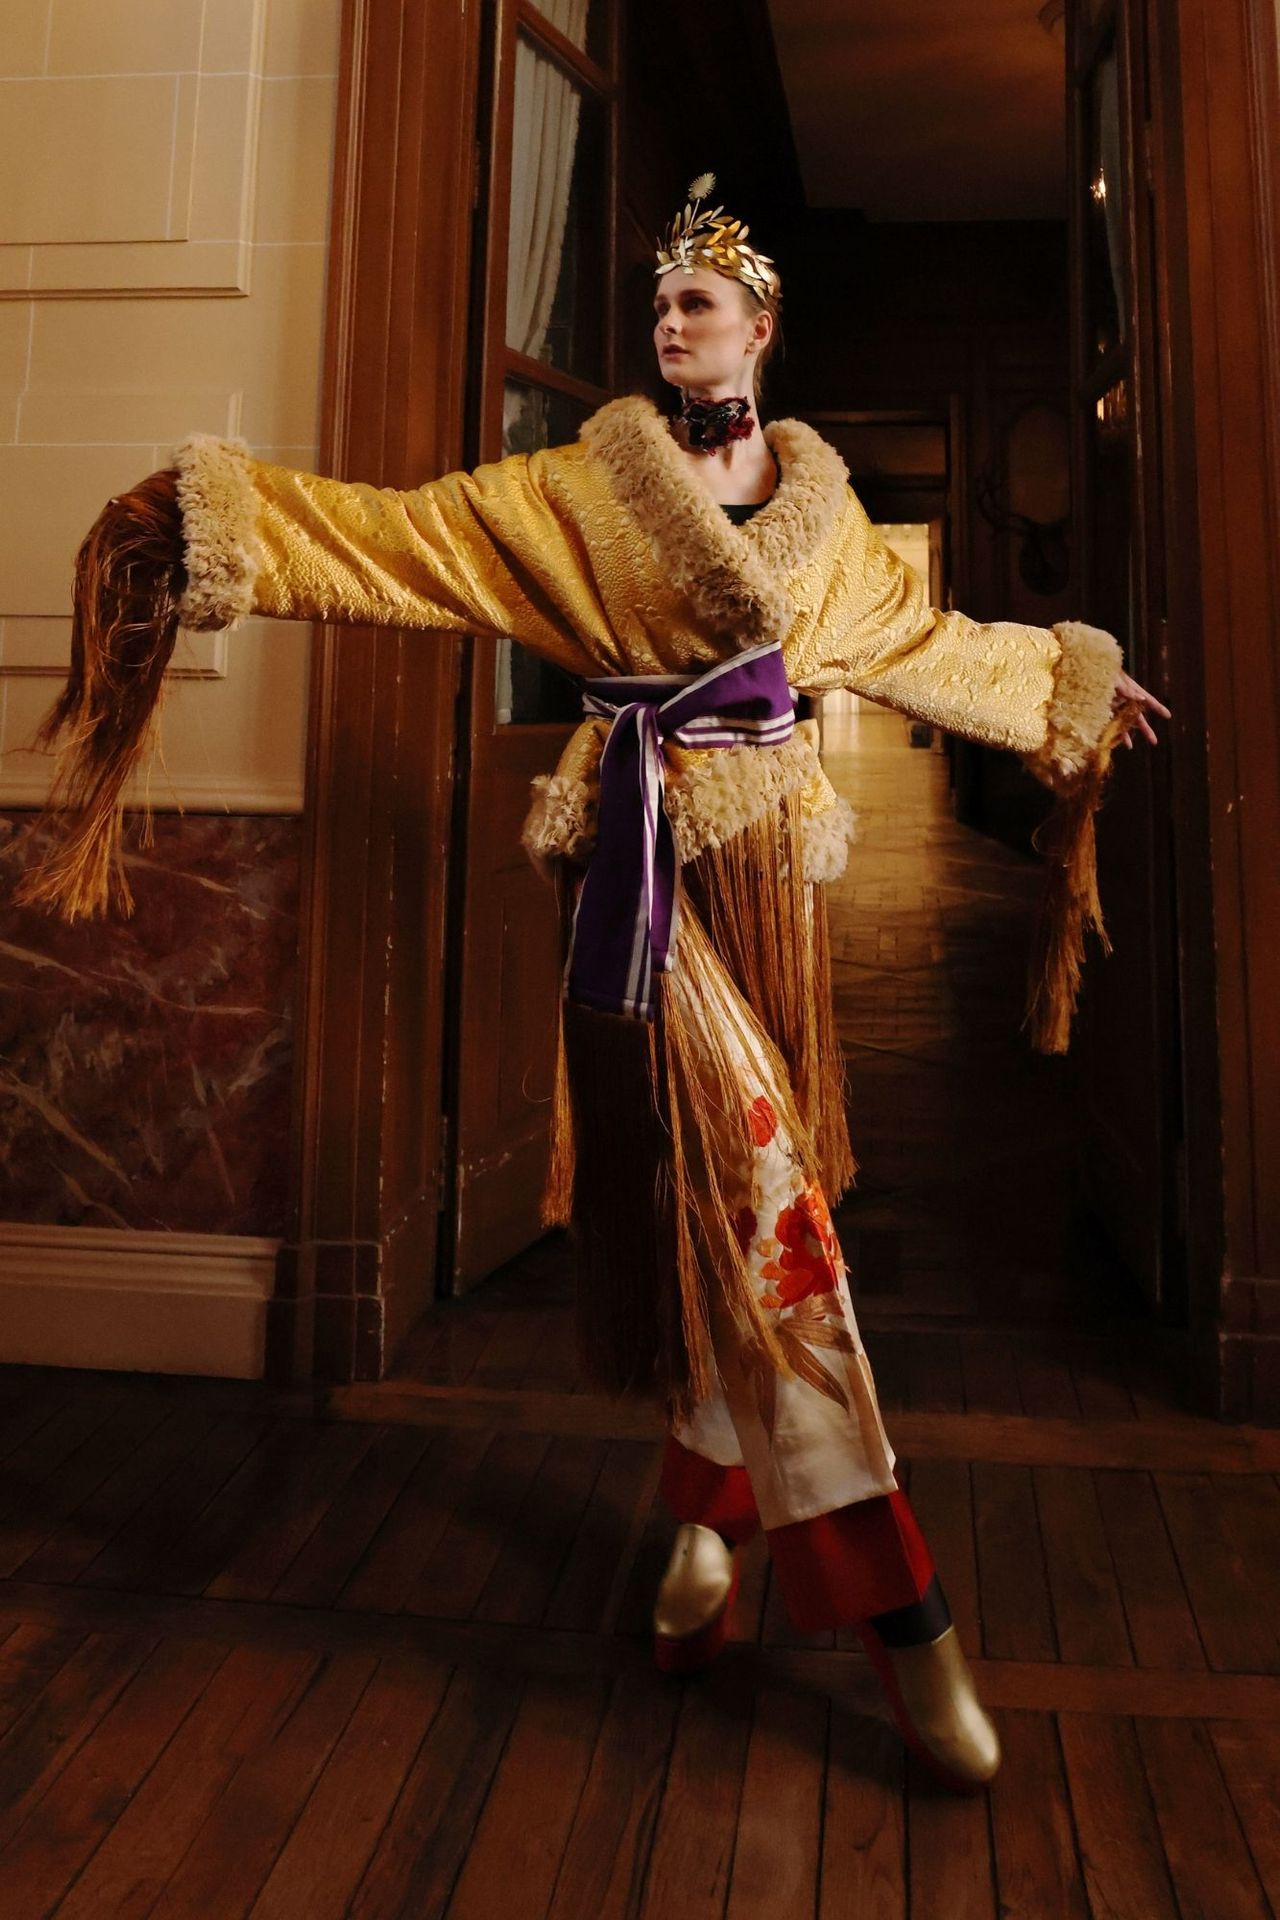 Ensemble "Madame Butterfly" Madame Butterfly" ensemble: gold wadded kimono in si&hellip;